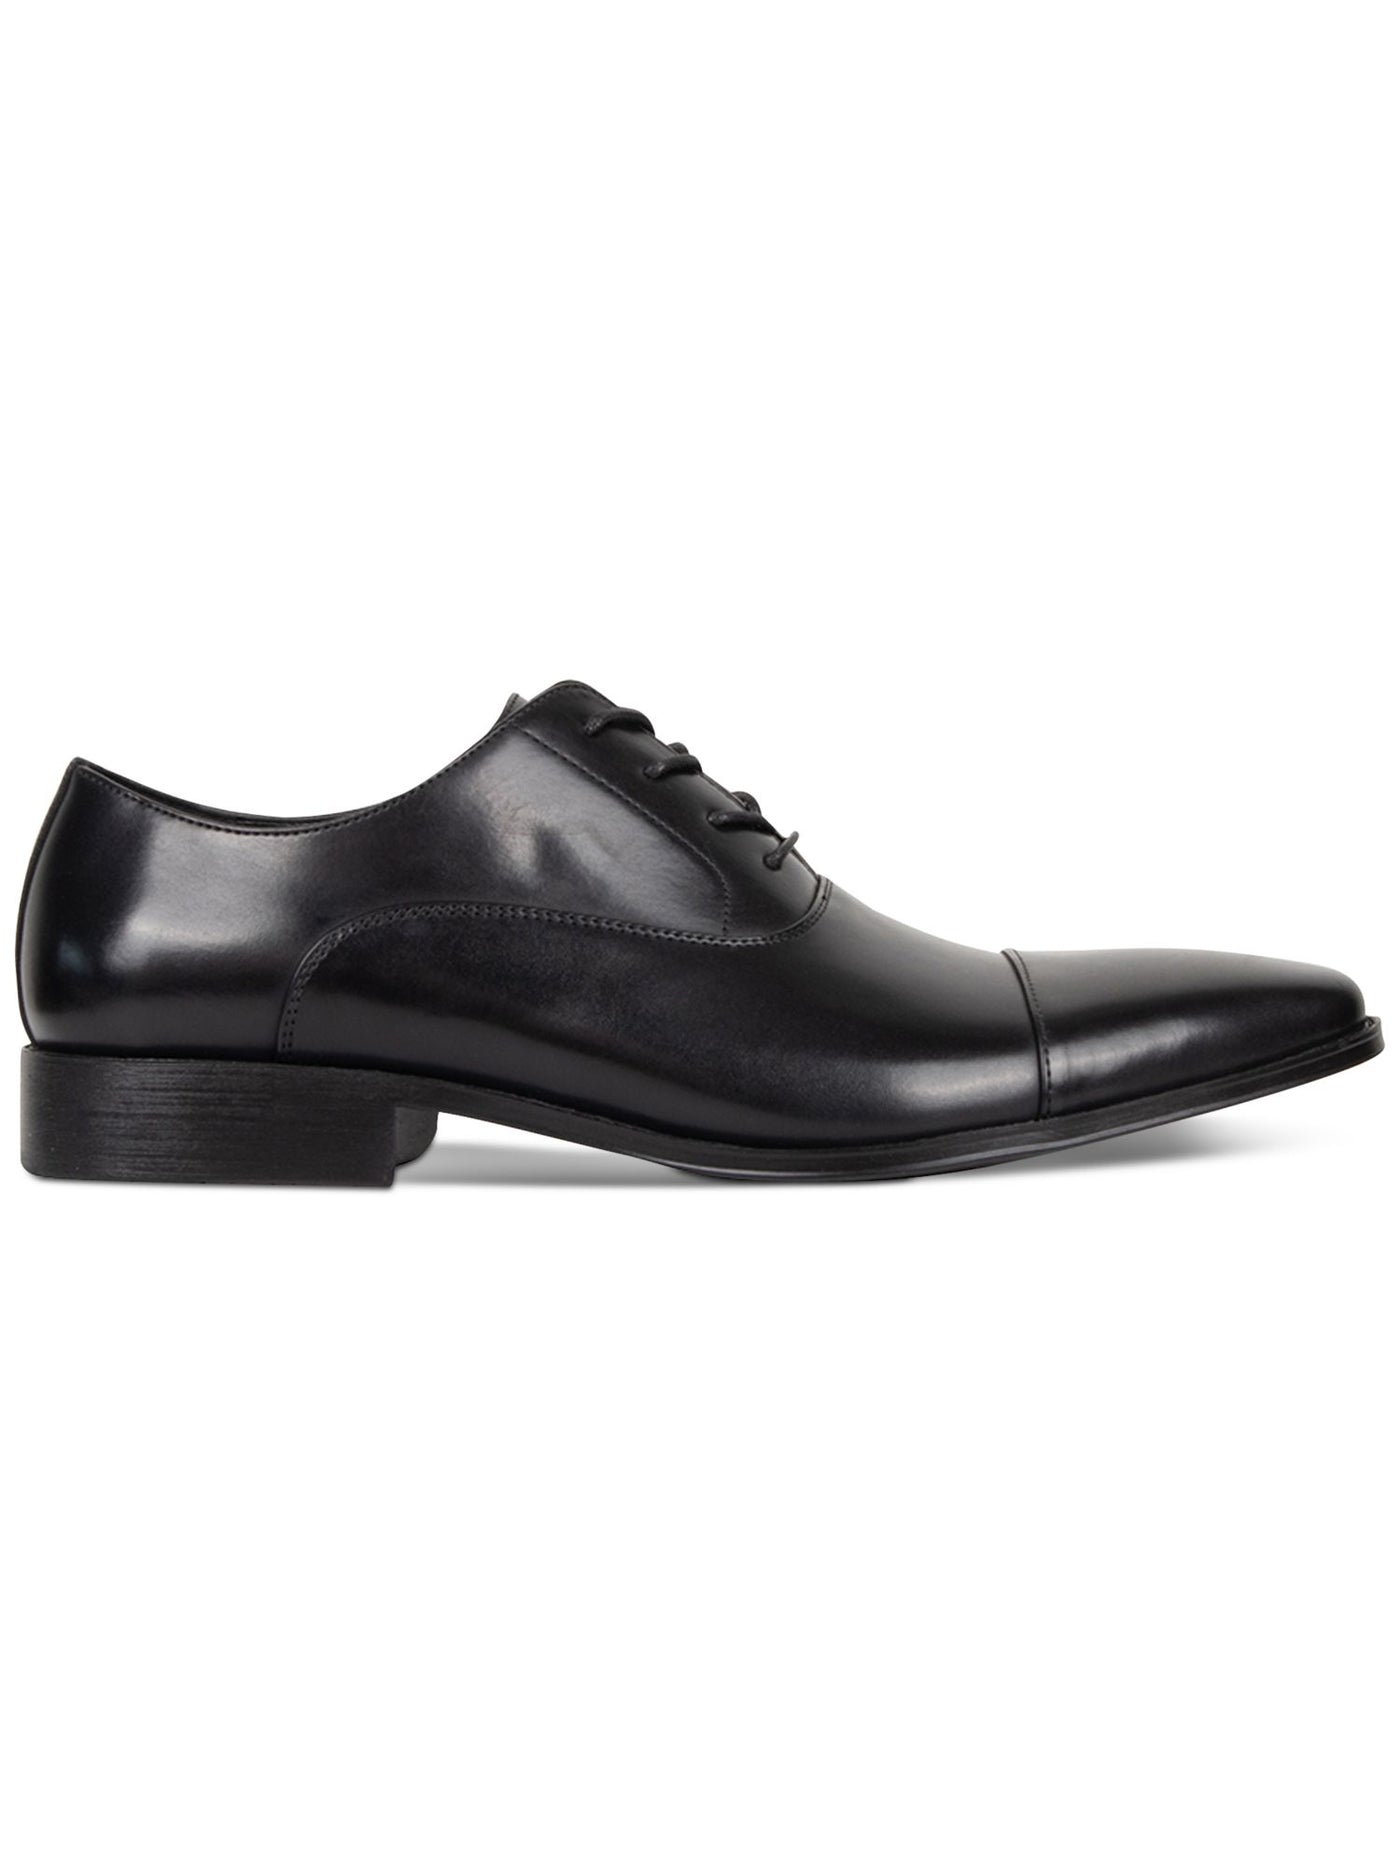 REACTION KENNETH COLE Mens Black Cap Toe Padded Kevin Cap Toe Block Heel Lace-Up Flats Shoes 8.5 M